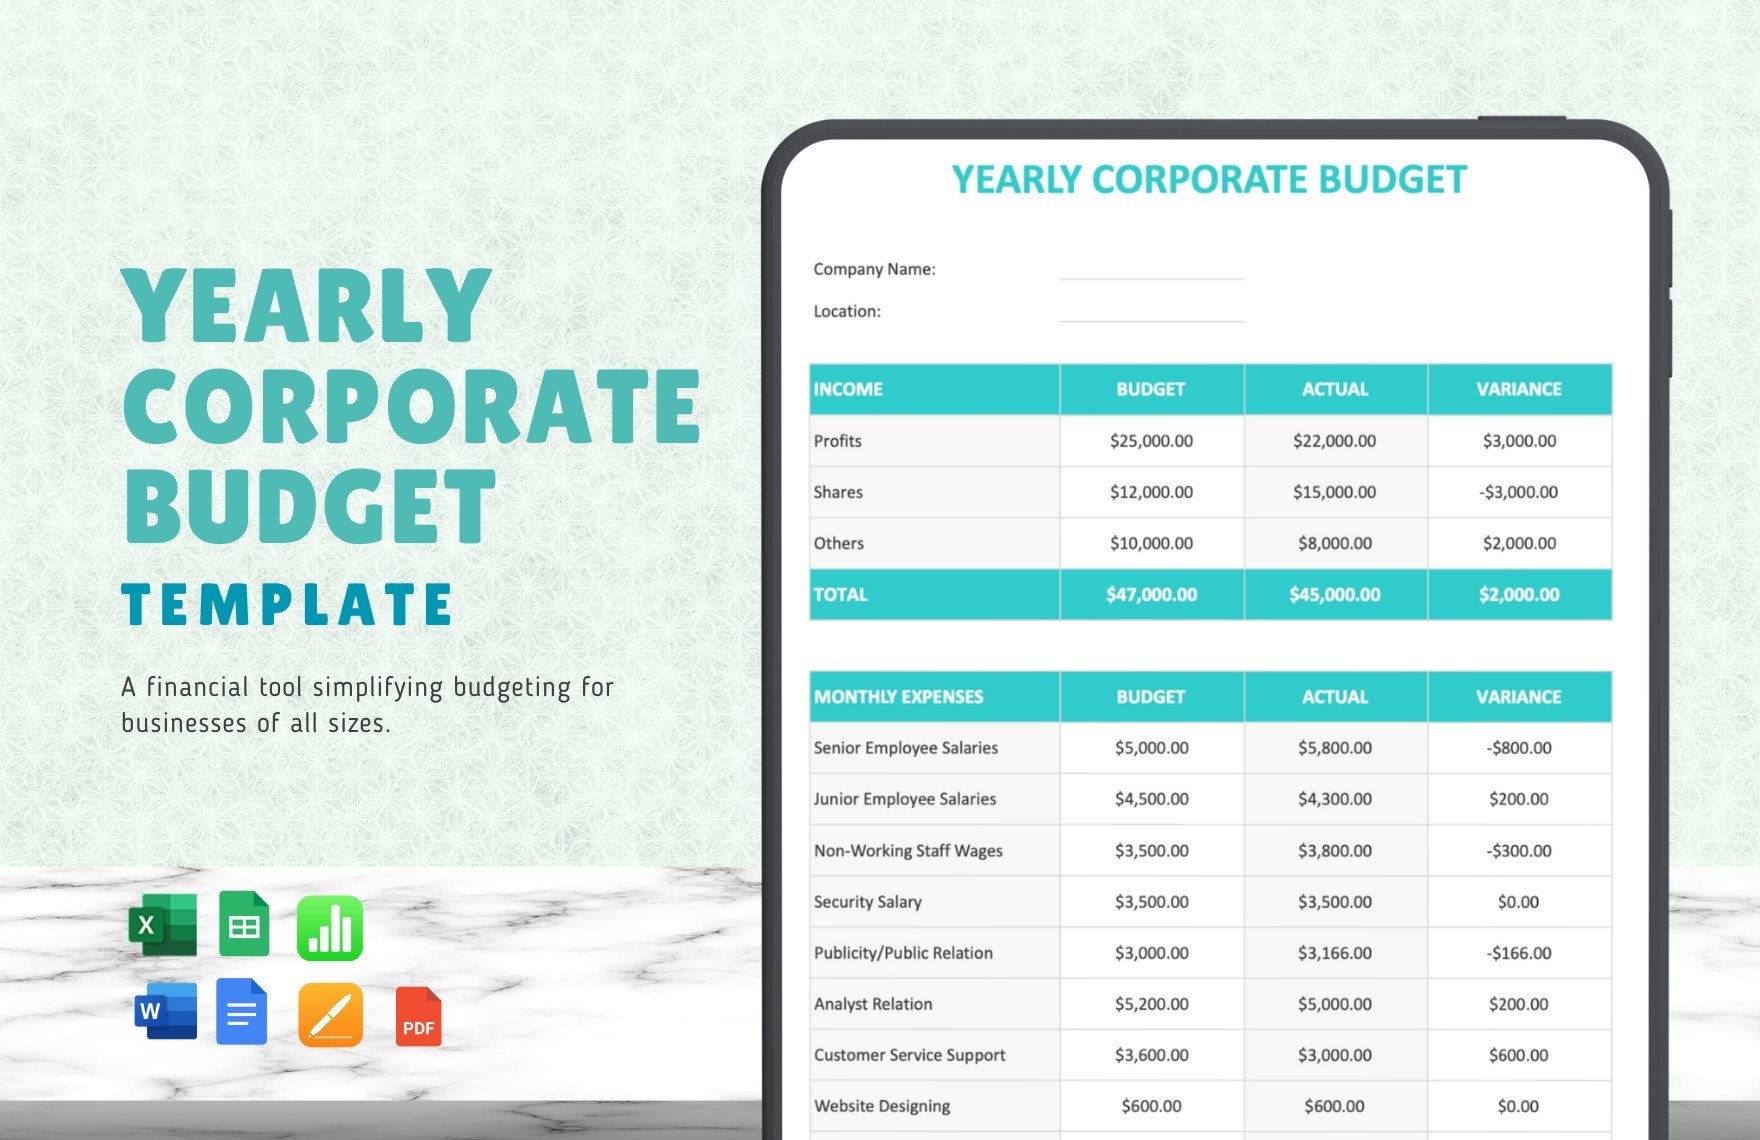 Yearly Corporate Budget Template in Word, Google Docs, Excel, PDF, Google Sheets, Apple Pages, Apple Numbers